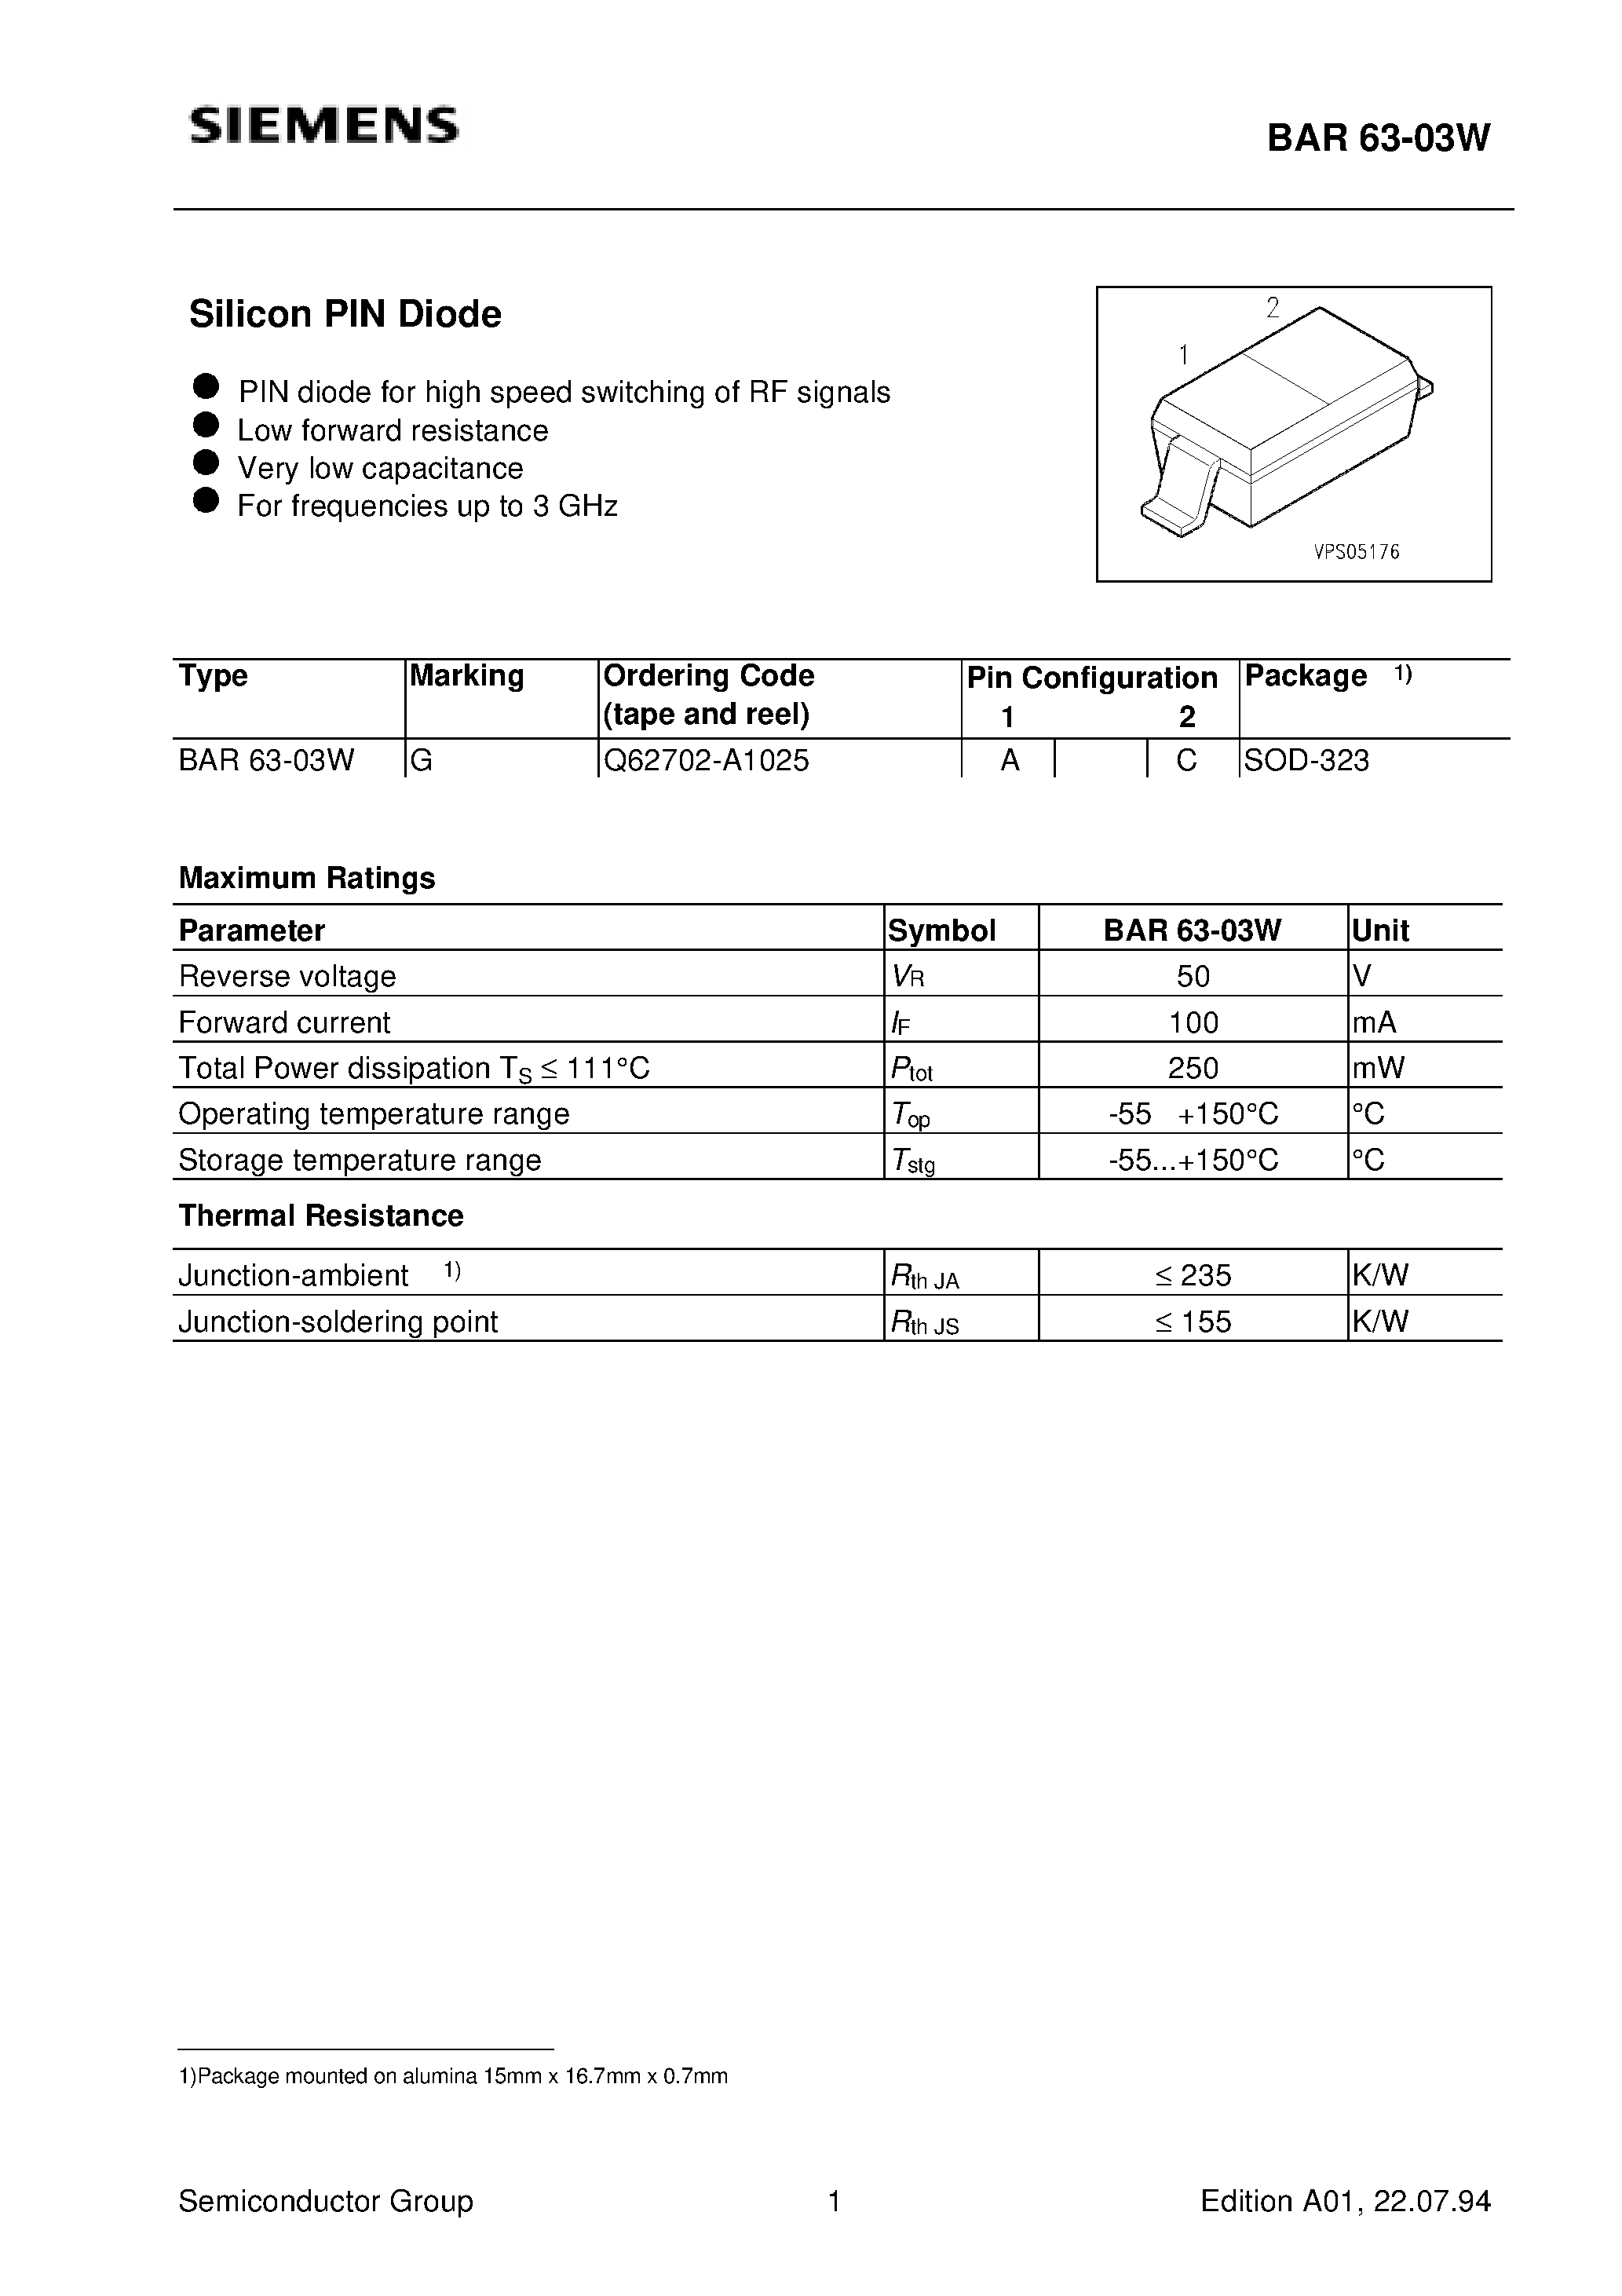 Datasheet BAR63-03 - Silicon PIN Diode (PIN diode for high speed switching of RF signals Low forward resistance Very low capacitance For frequencies up to 3 GHz) page 1